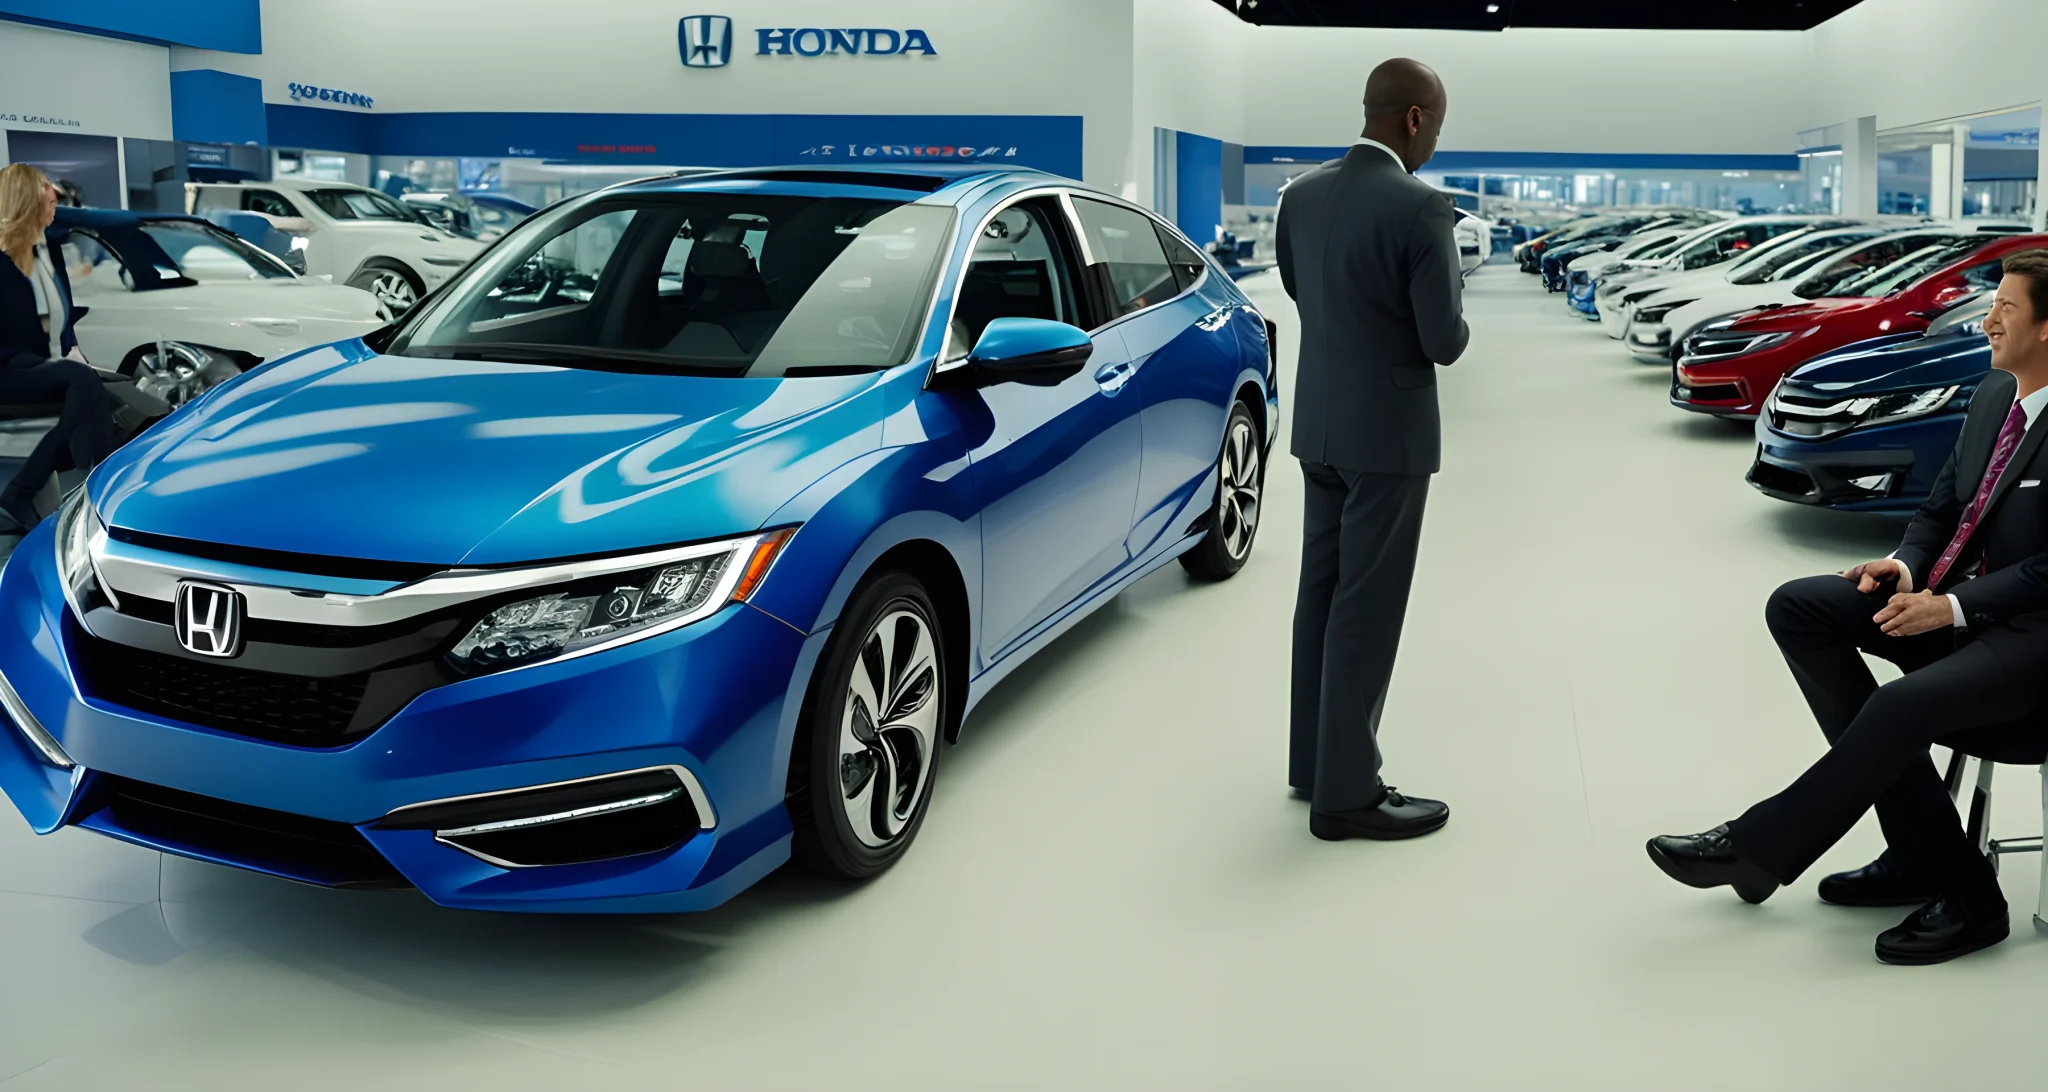 The image shows a Honda car dealership with rows of new and used Honda vehicles on display. In the foreground, a sales representative is speaking with a couple seated at a desk.